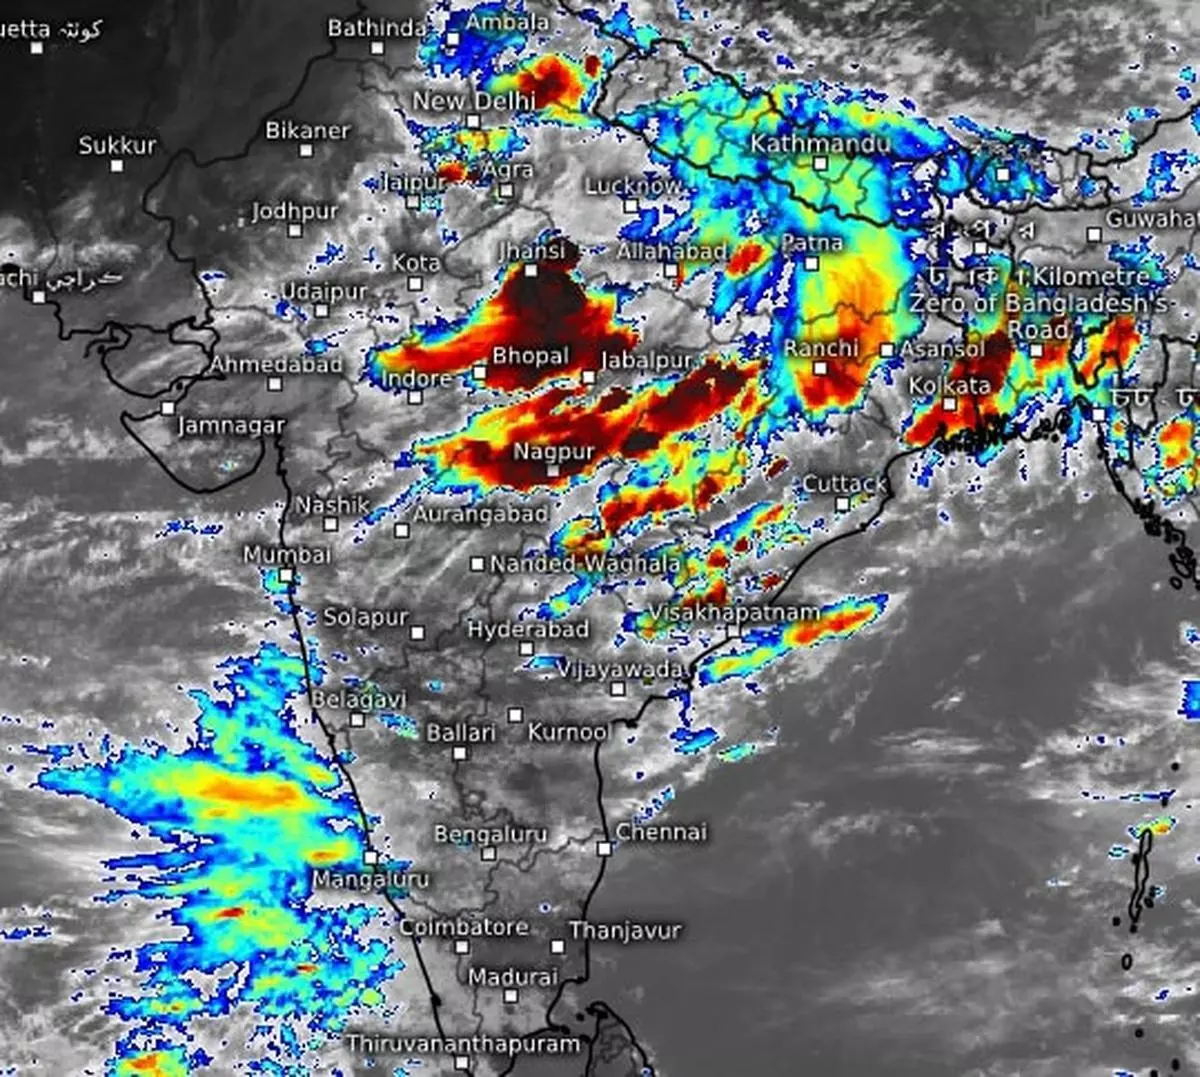 Heavy rain-laden clouds propagated South-West from East India into parts of North-West and adjoining Central India as the monsoon covered Uttarakhand and most parts of Himachal Pradesh by Wednesday evening.